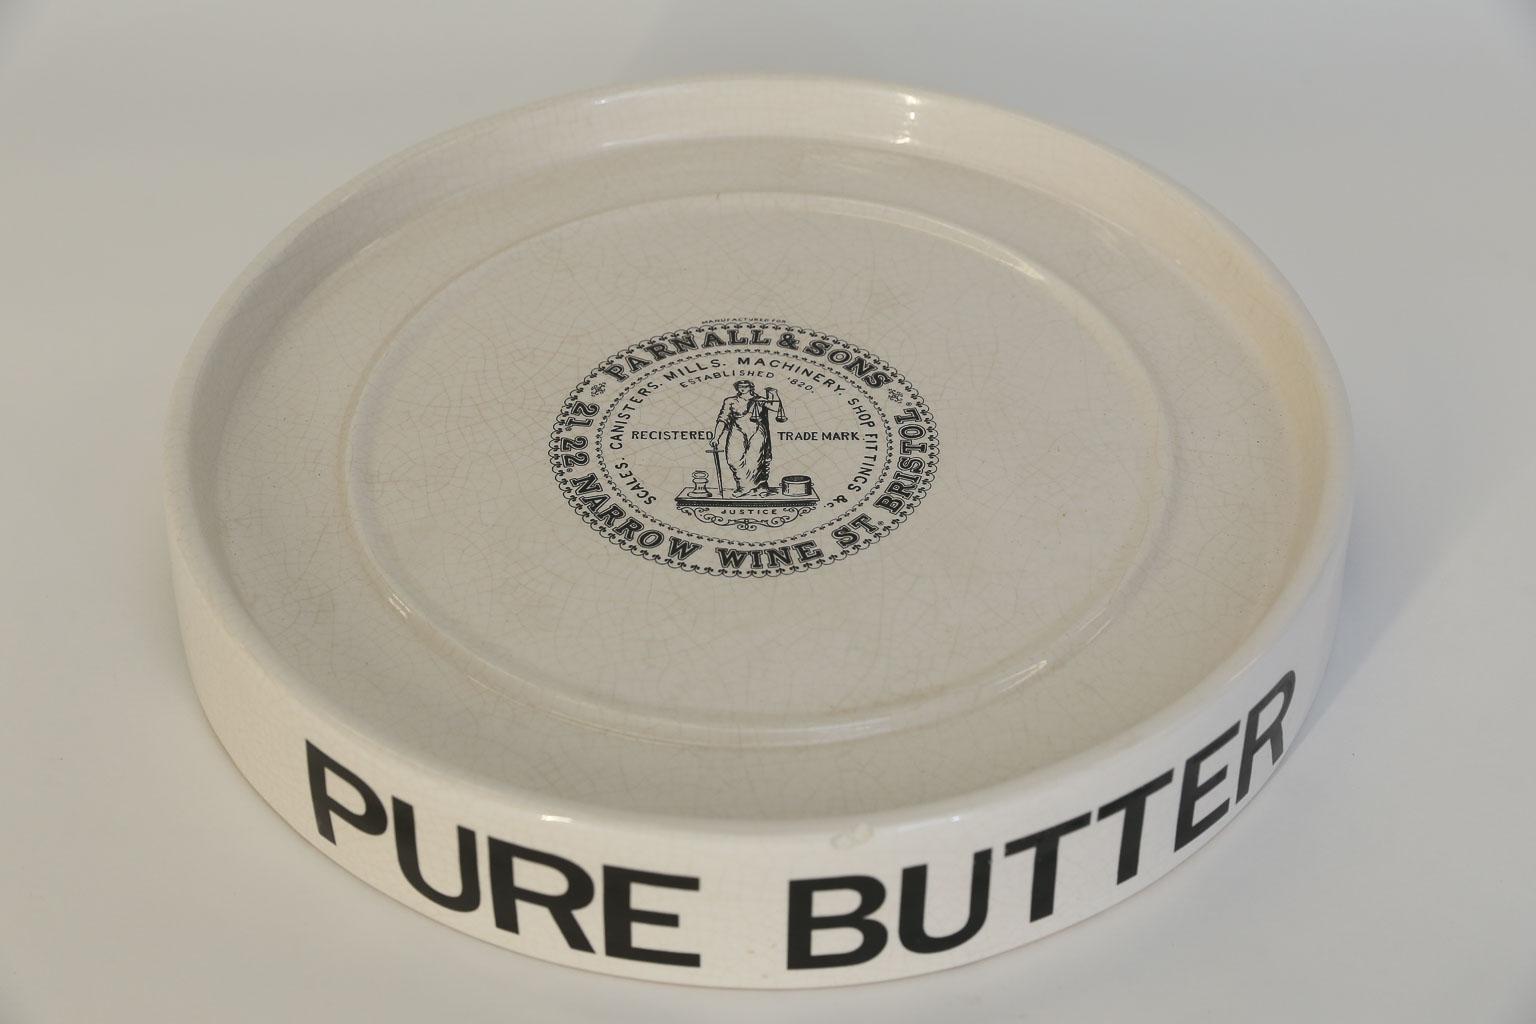 This is a mid-20th century pure butter dairy slab originally used for displaying butter on the dairy shop counter in England. The decorative advertising is printed in black on the side reading PURE BUTTER, and the top has the Parnall & Sons logo. A